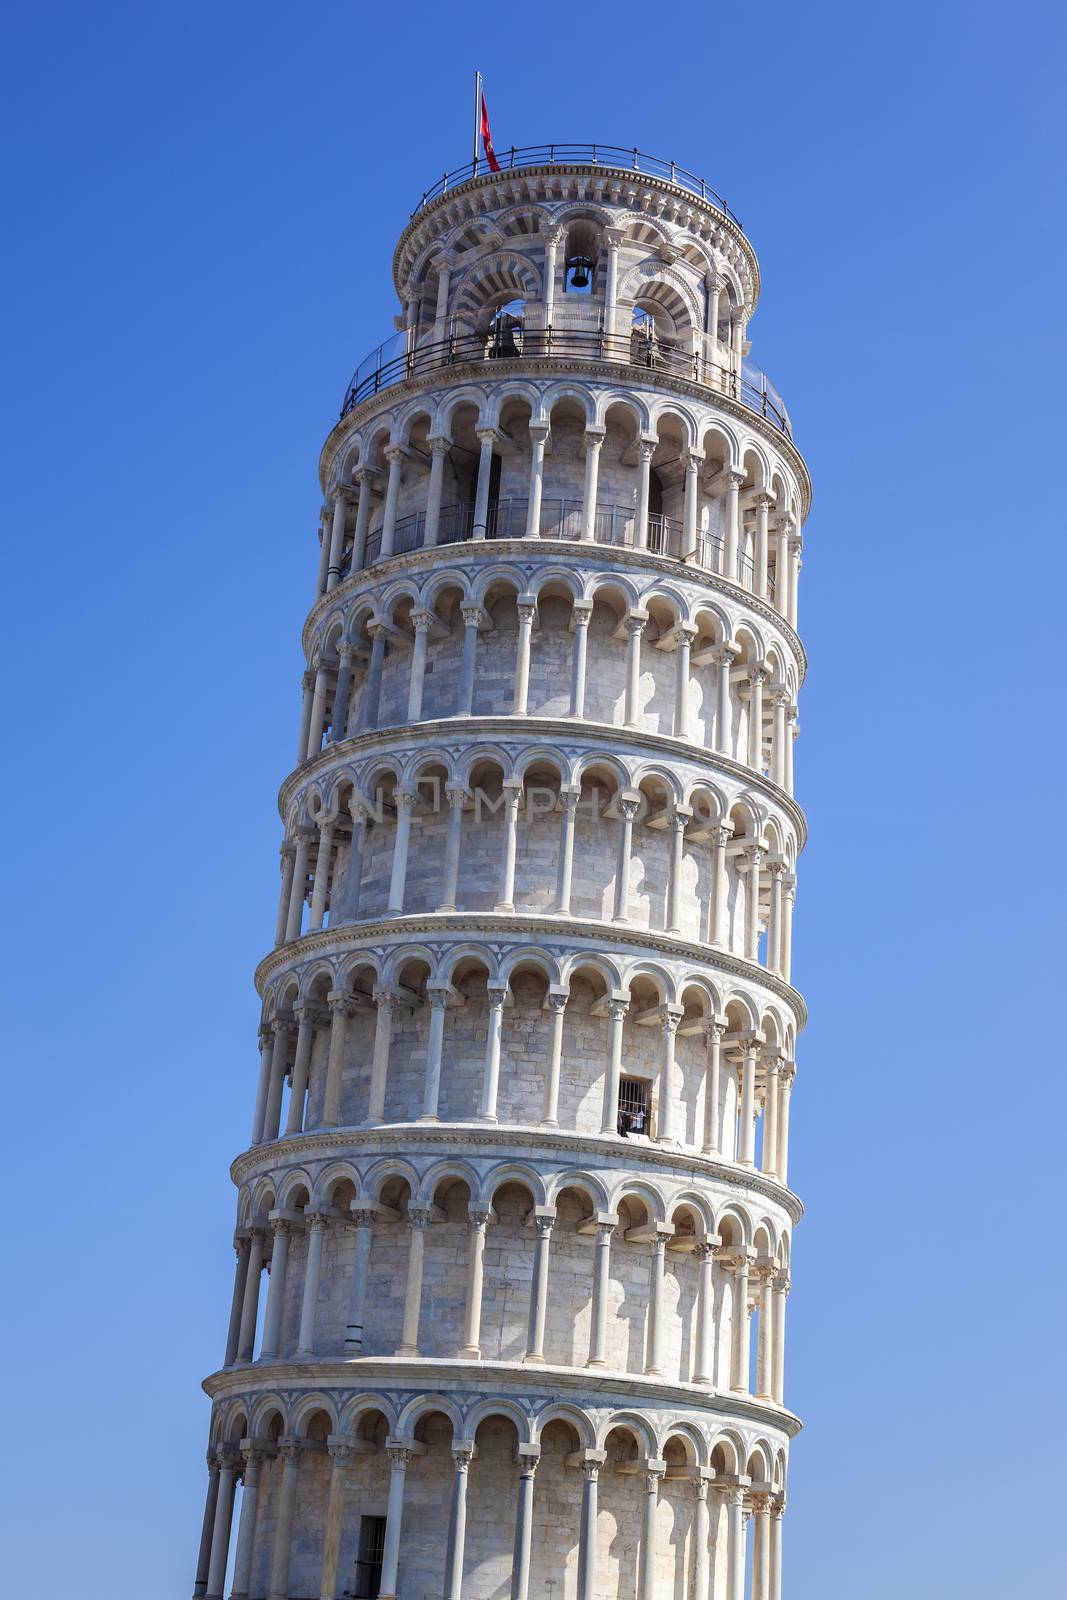 Famous Leaning Tower of Pisa by vwalakte